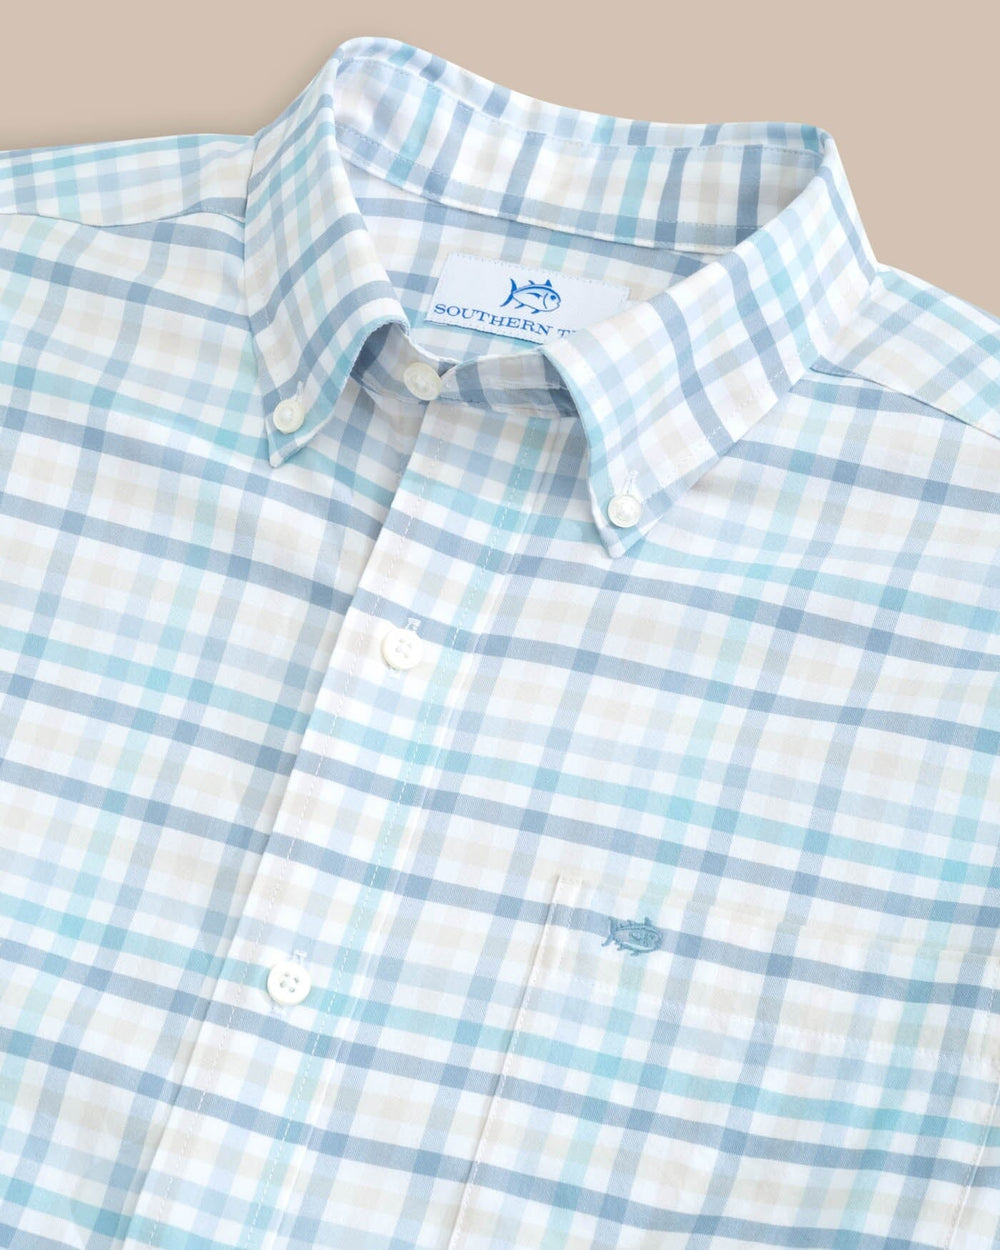 The detail view of the Southern Tide Coastal Passage Pelham Gingham Long Sleeve Sport Shirt by Southern Tide - Marine Blue